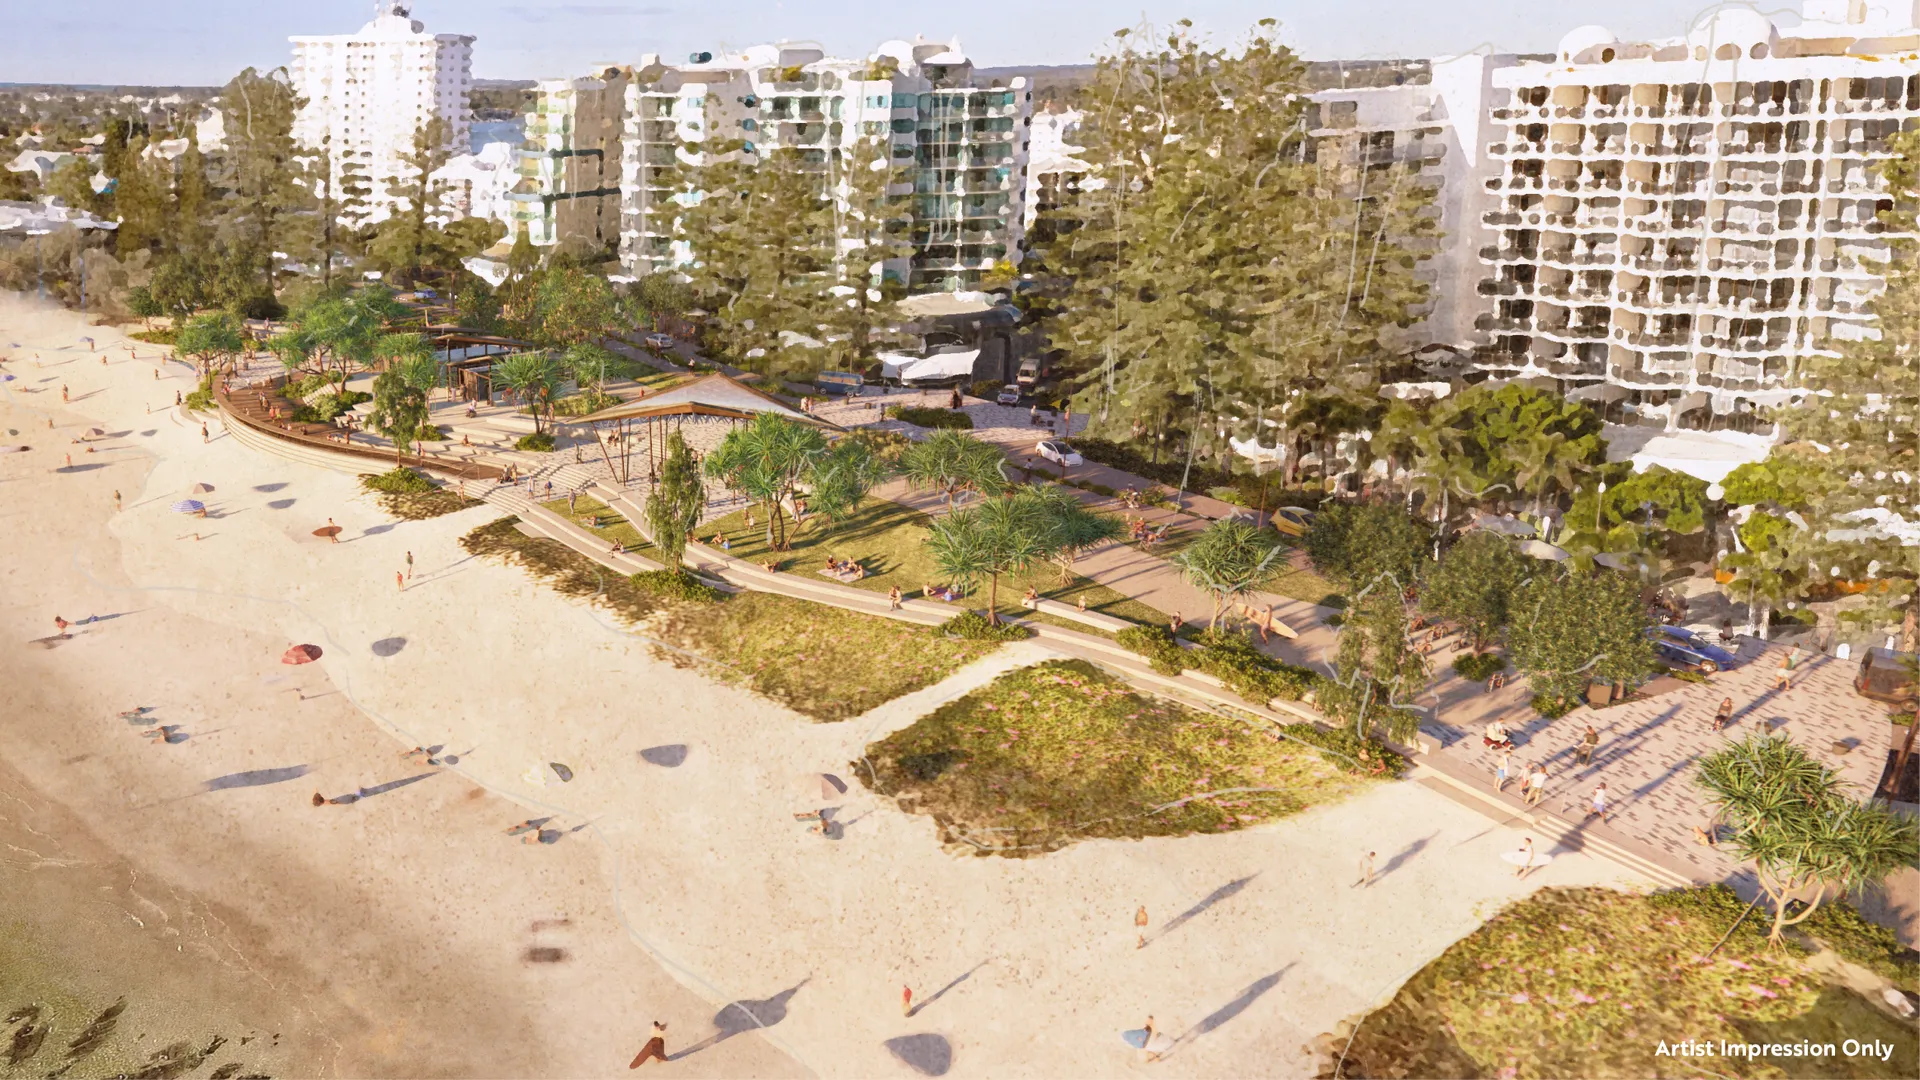 Artist’s impression of the Central Meeting Place with new, accessible public amenities and a terraced seawall which doubles as beachside seating with plants and shade trees.